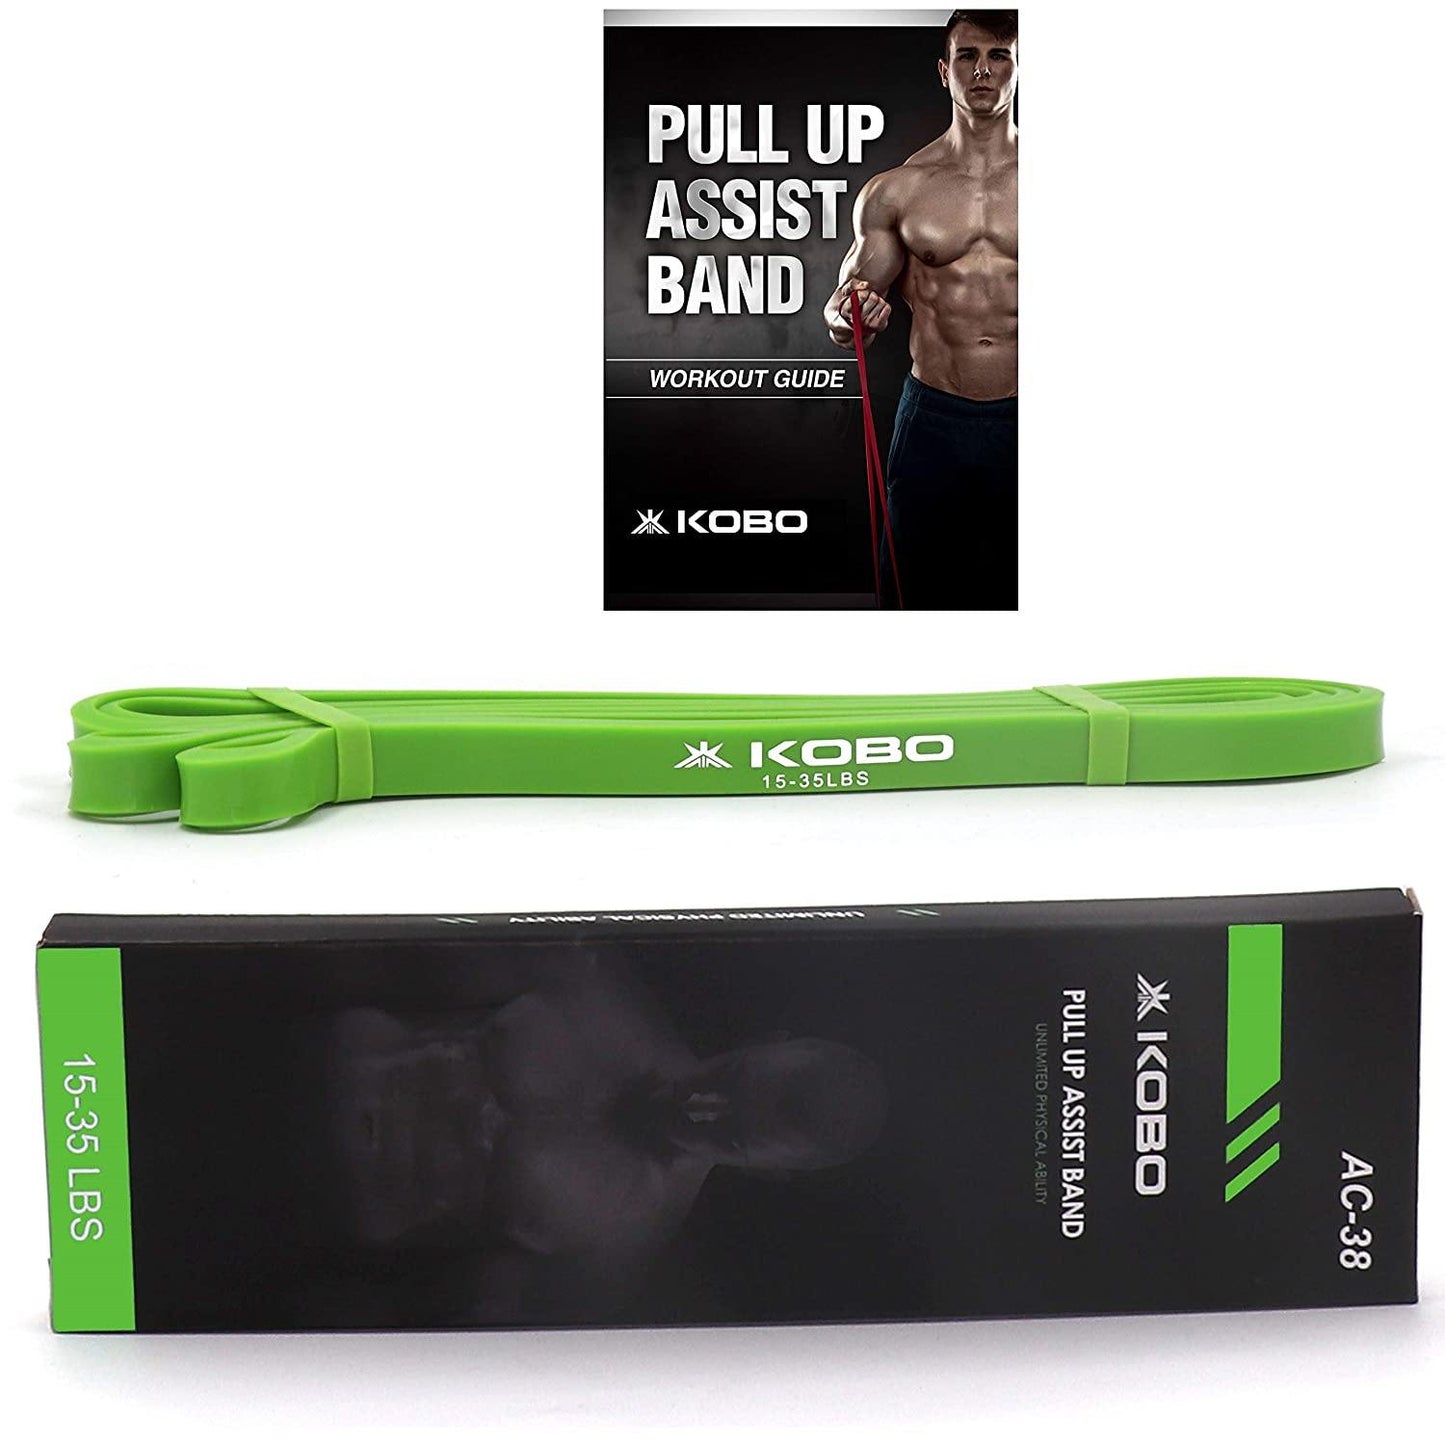 Kobo AC-38 Power Loop Band/Resistance Band/Rubber Pull Up Assist Band - Best Price online Prokicksports.com